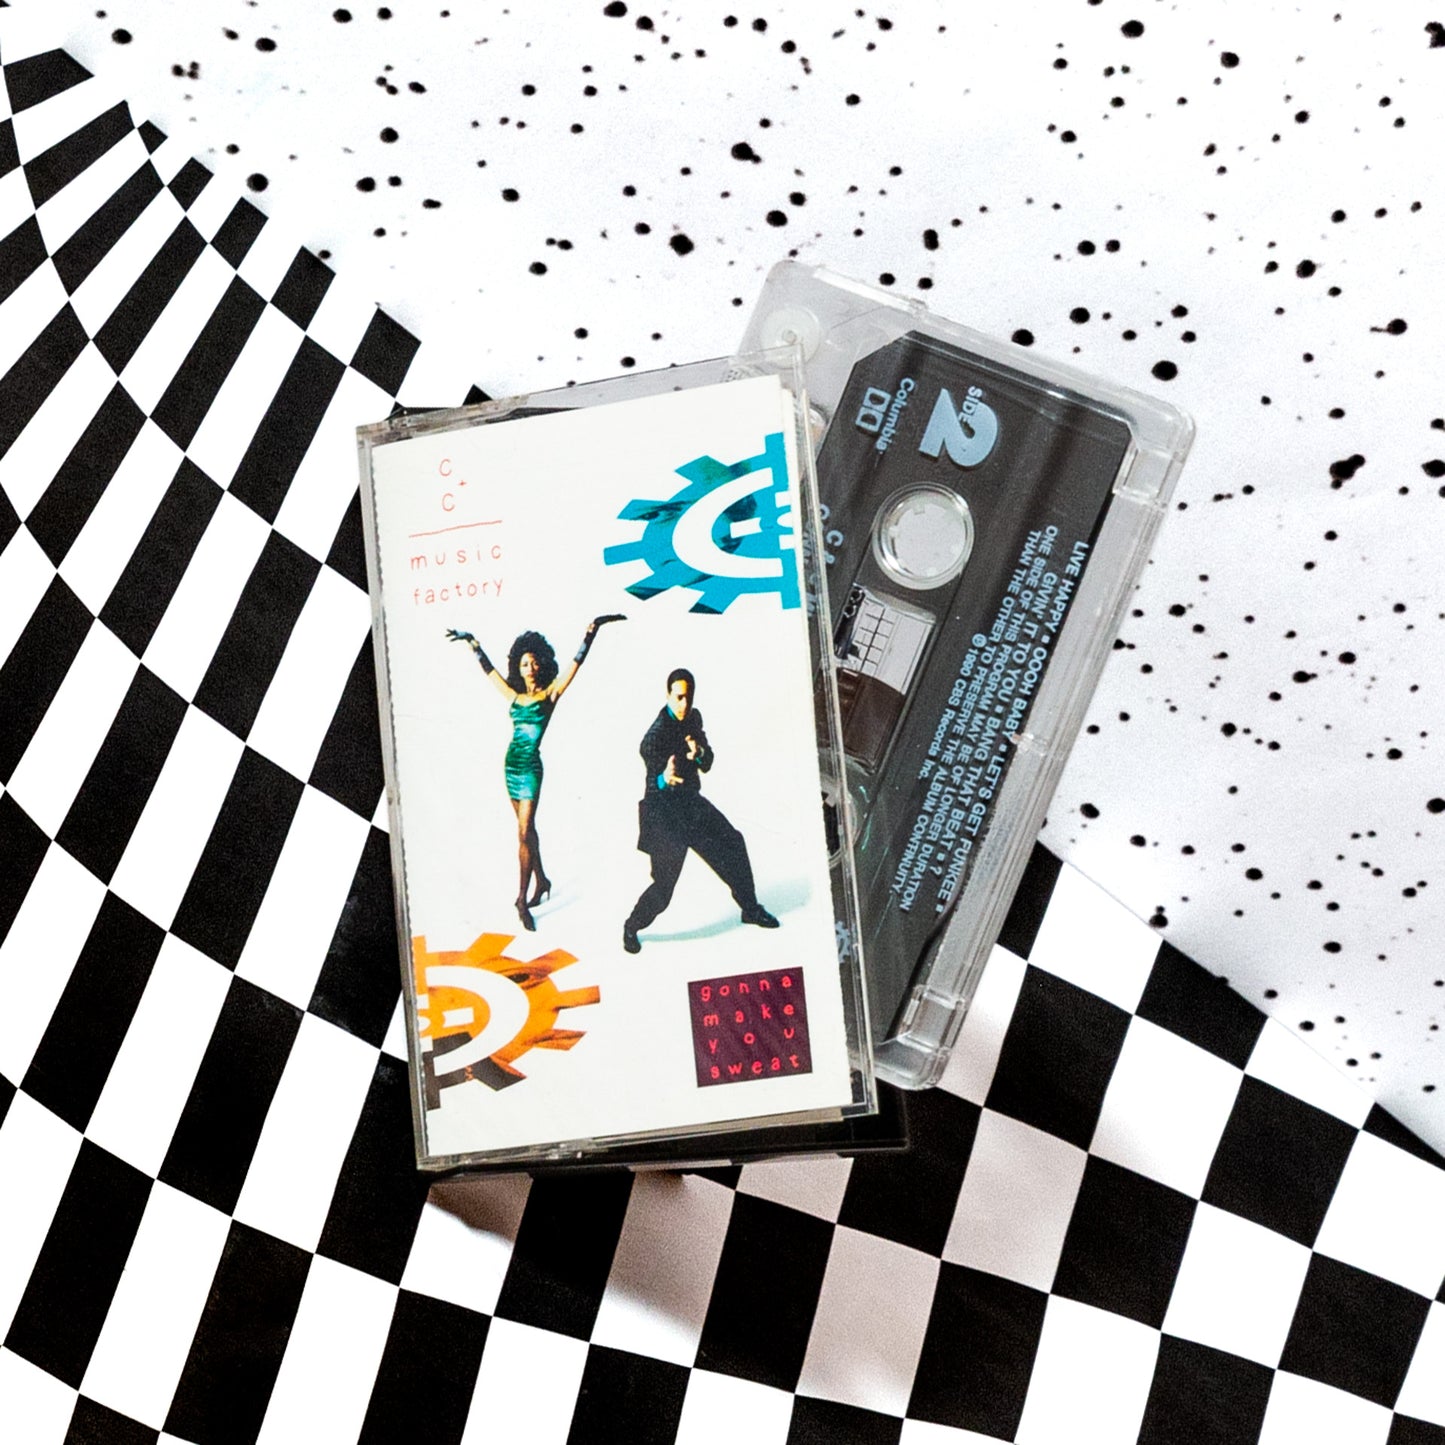 Gonna Make You Sweat, by C+C Music Factory (Audio Cassette)